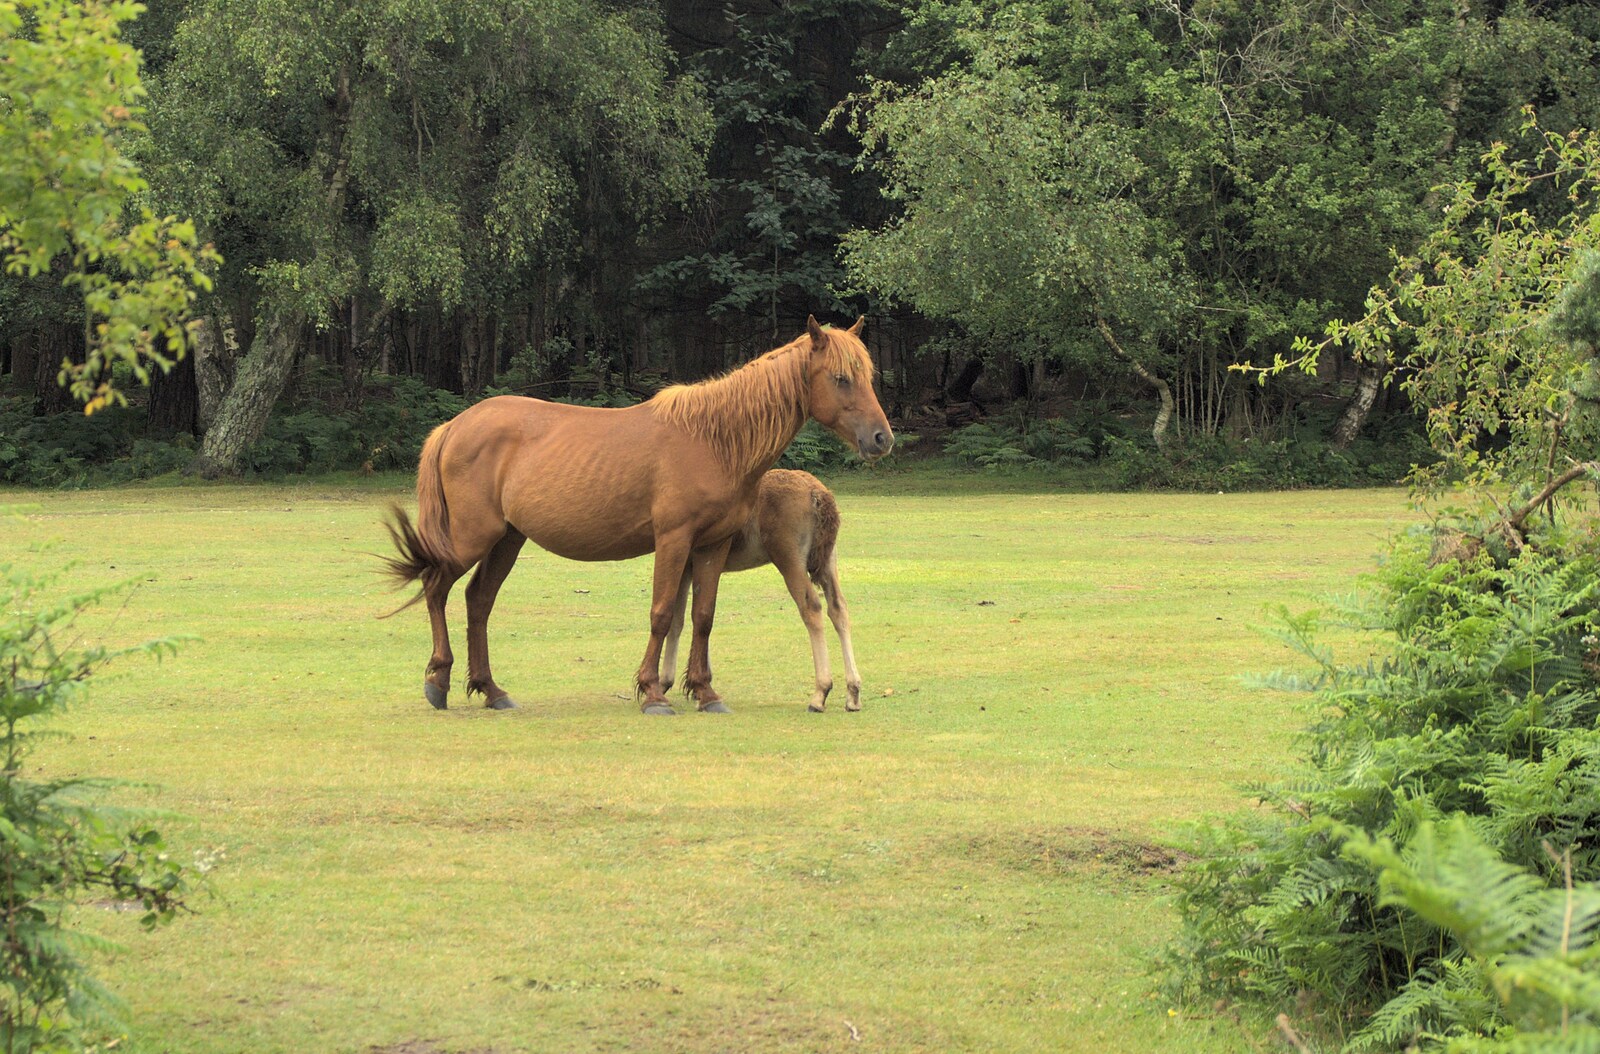 A pony and foal from A Camper Van Odyssey: Oxford, Salisbury, New Forest and Barton-on-Sea - 19th June 2011